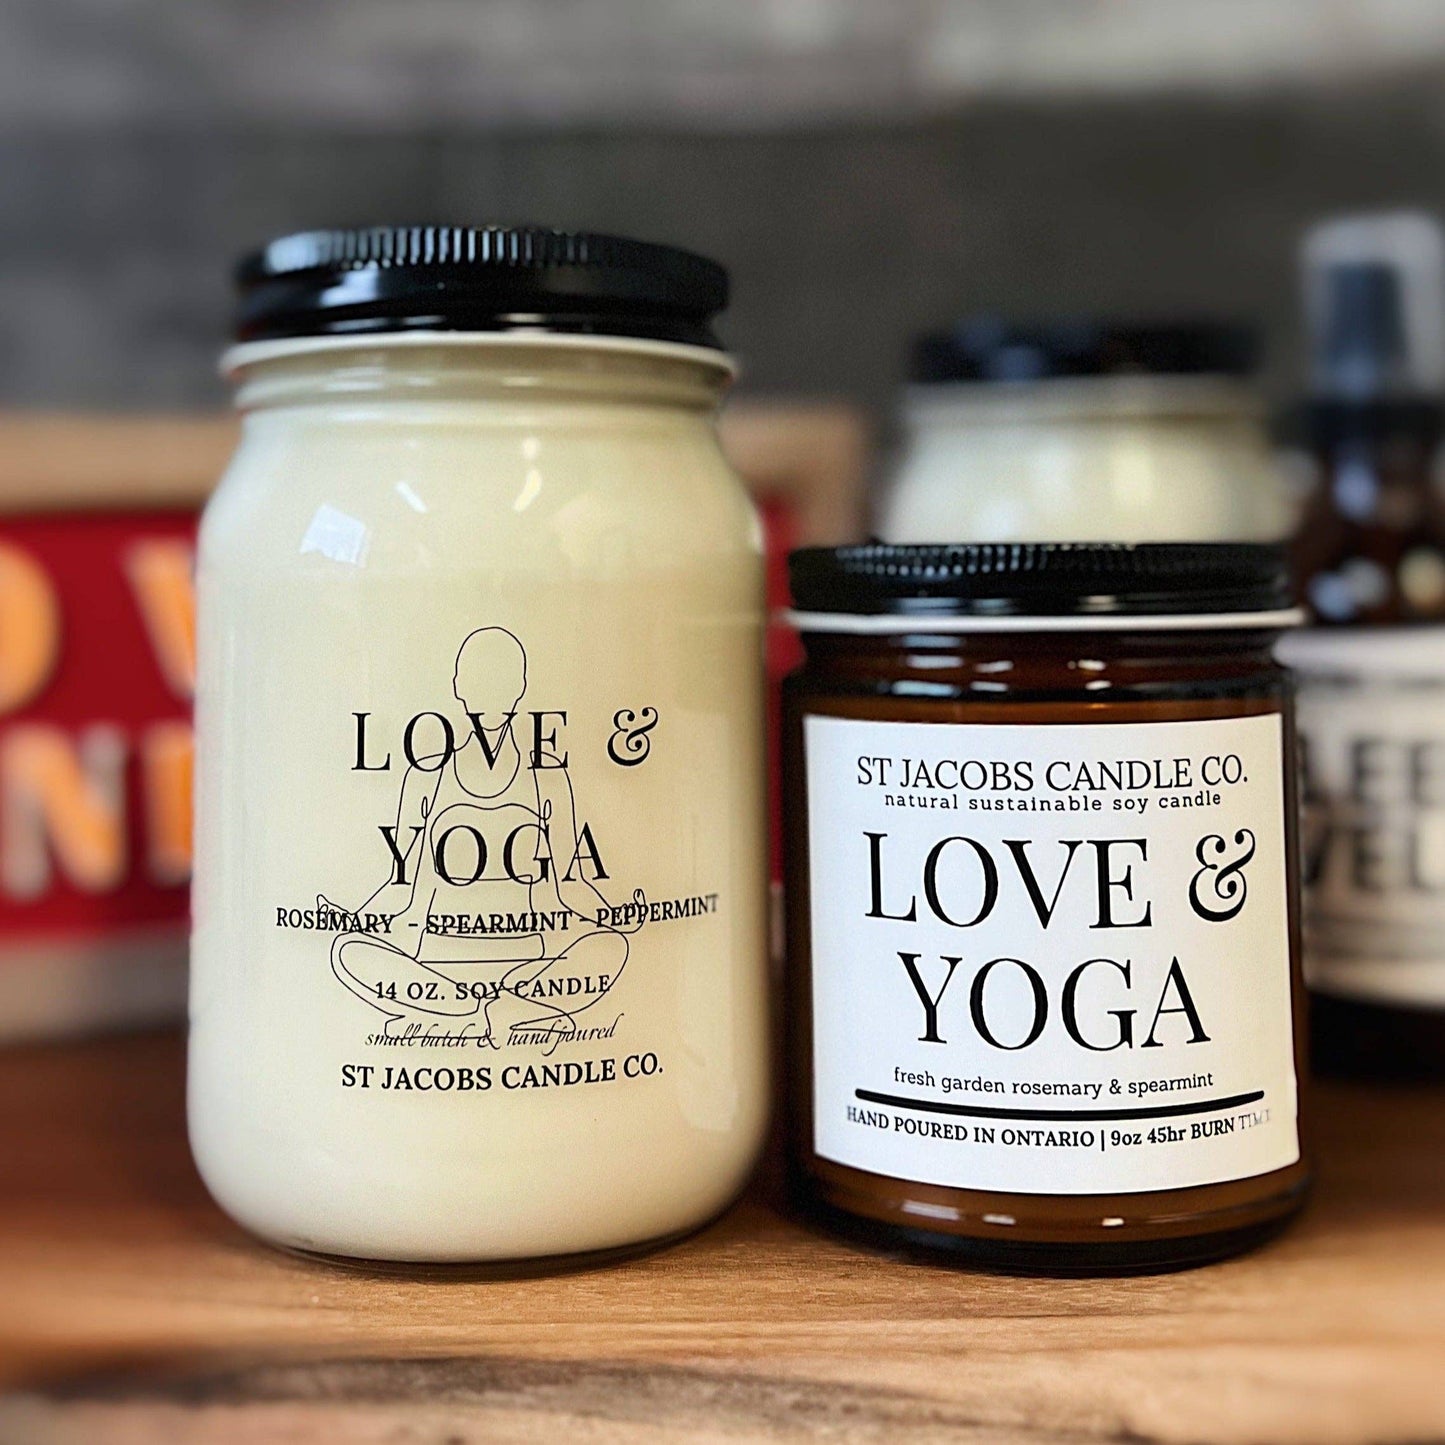 St Jacobs Candle Co. - "LOVE & YOGA " Natural Soy Wax Candle